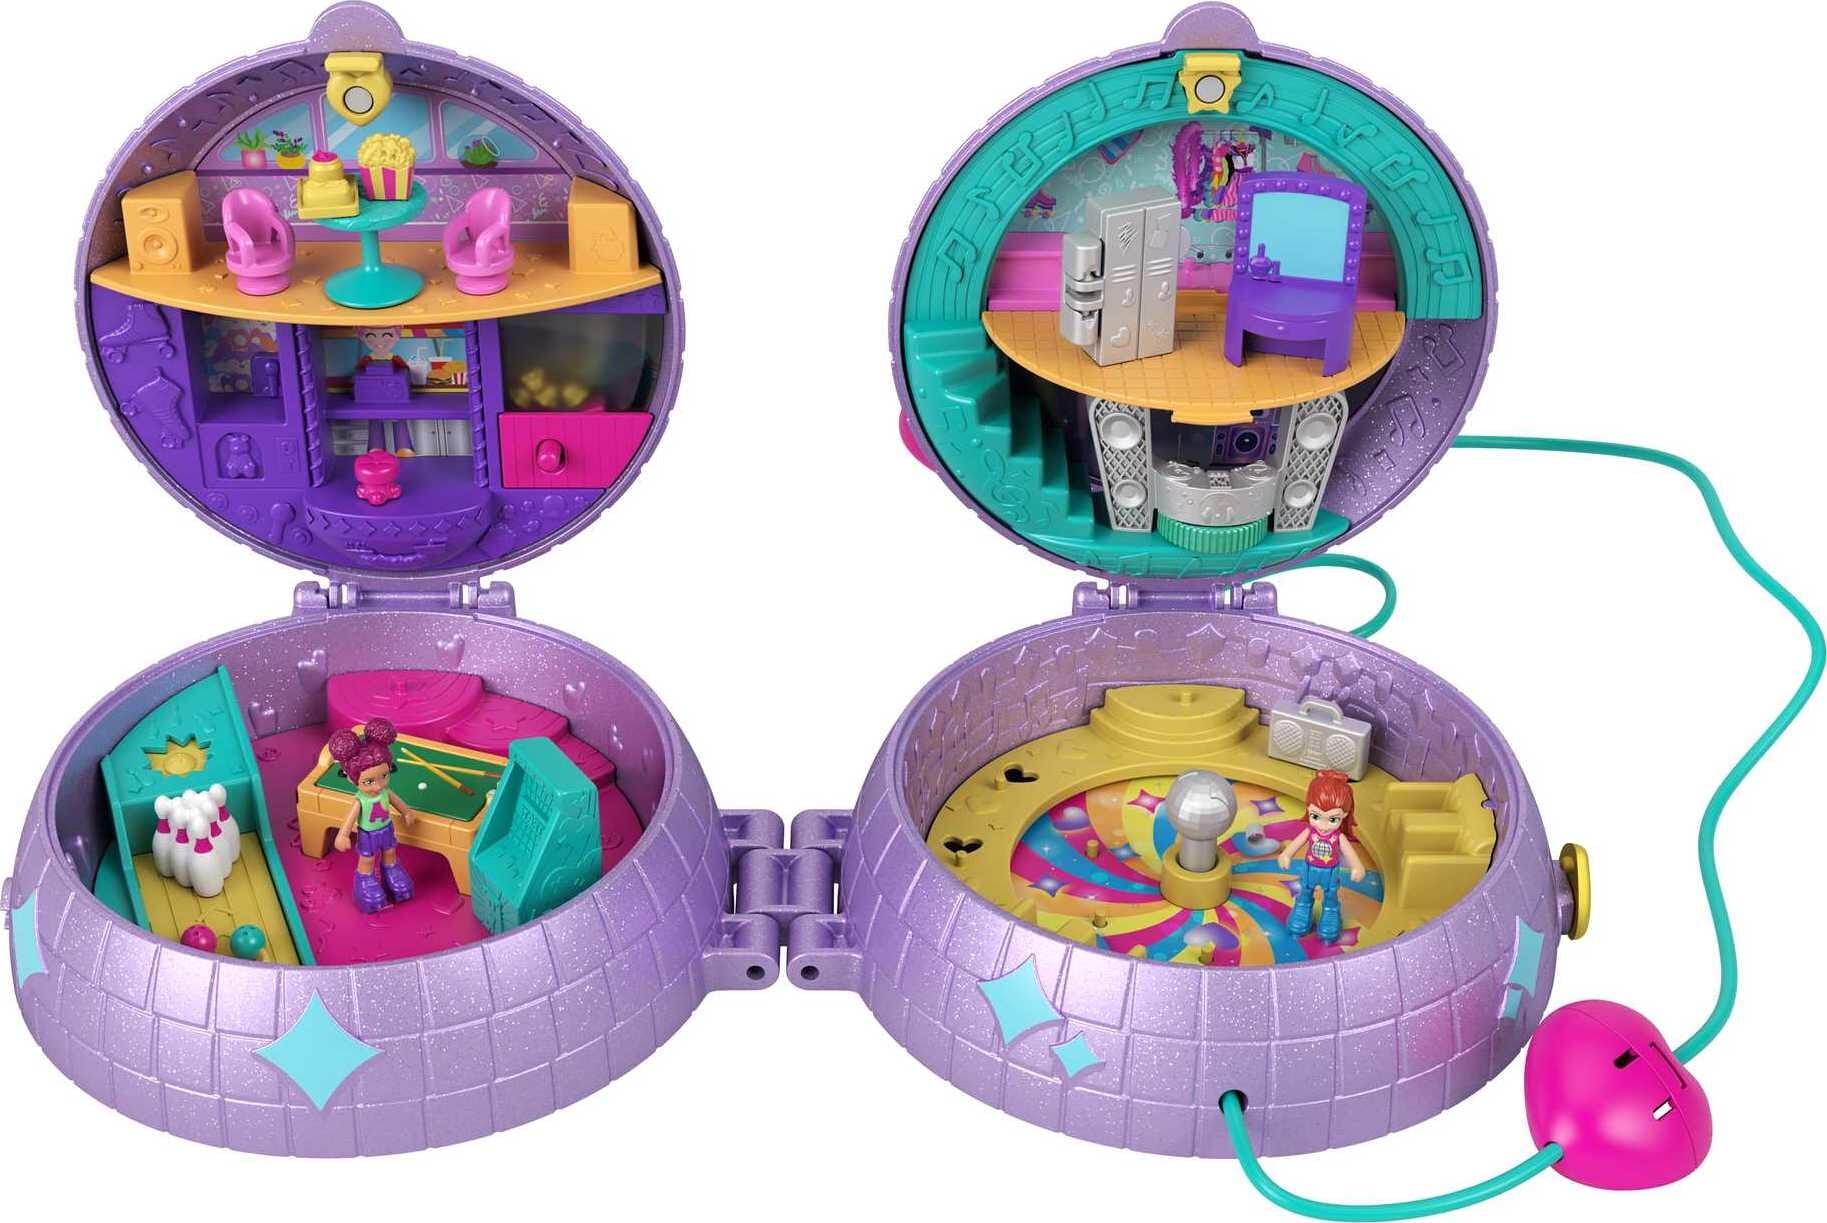 Polly Pocket Double Play Skating Compact, 2-in-1 Playset with 2 Micro Dolls  & 16 Accessories